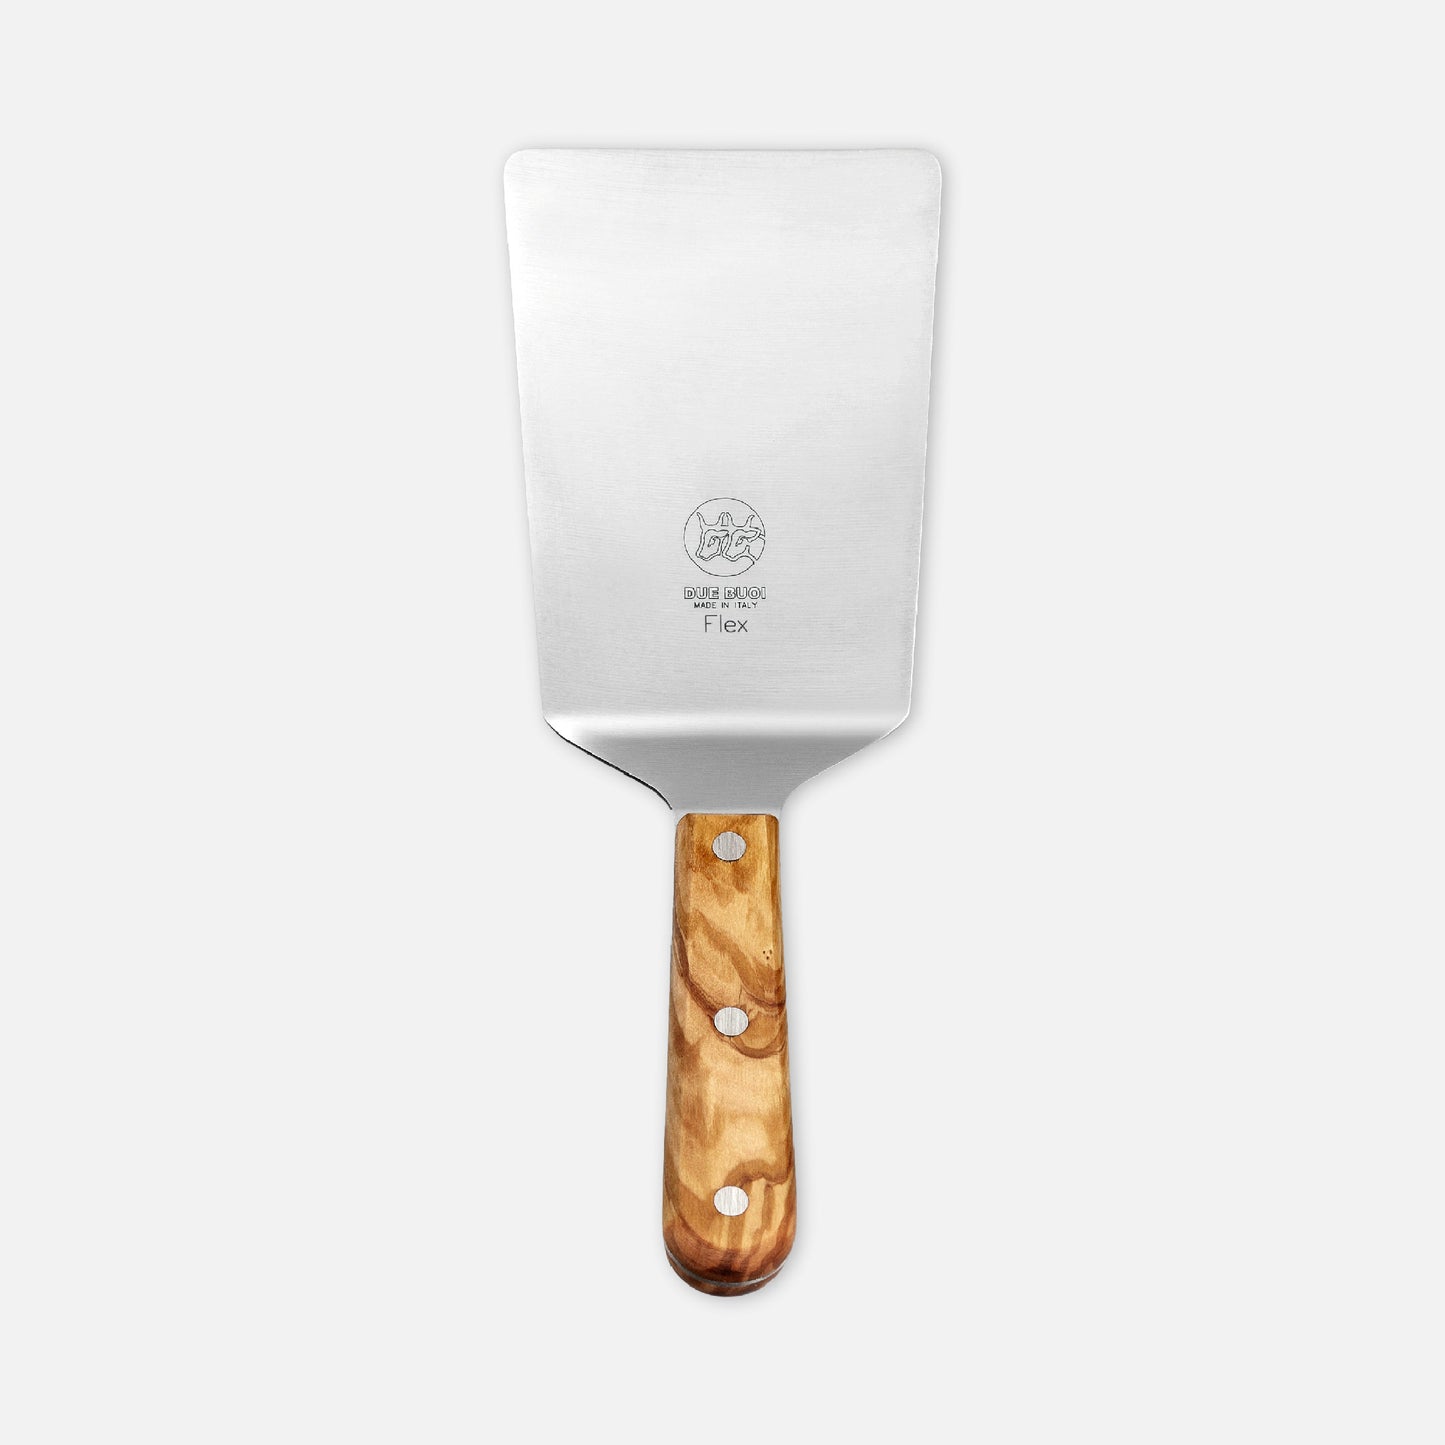 Deiss Pro Metal Spatula with Comfortable Wooden Handle - Kitchen